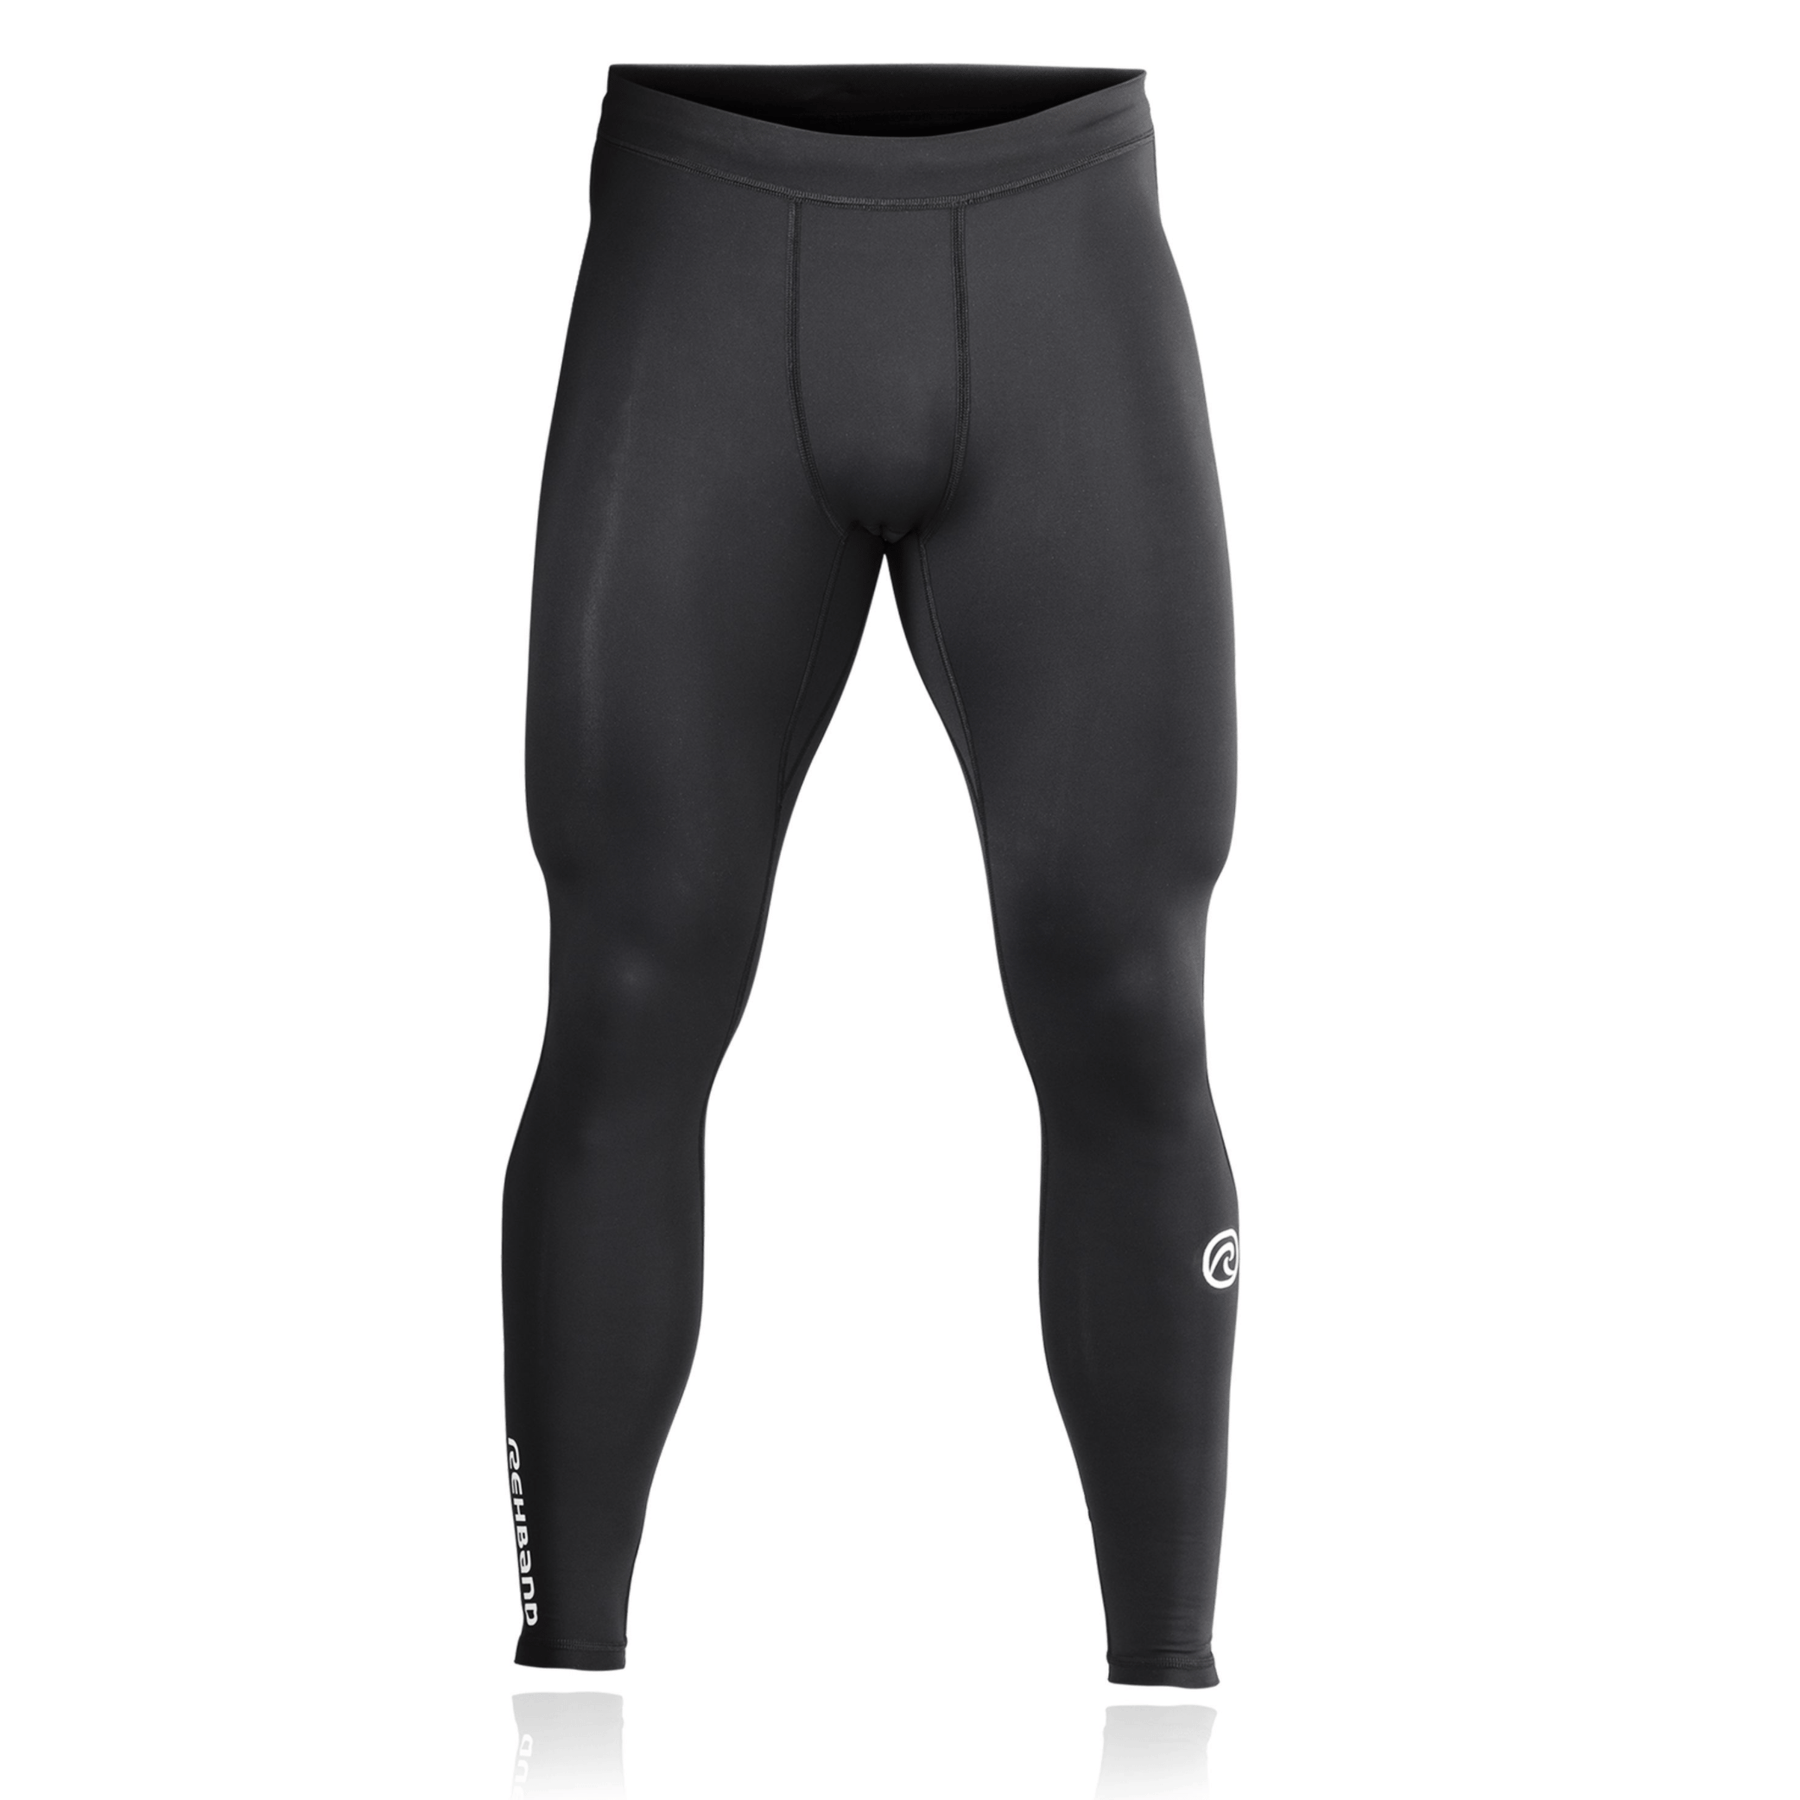 Odoland 2 Pack Mens Compression Running Pants 2 in 1 Quick Dry